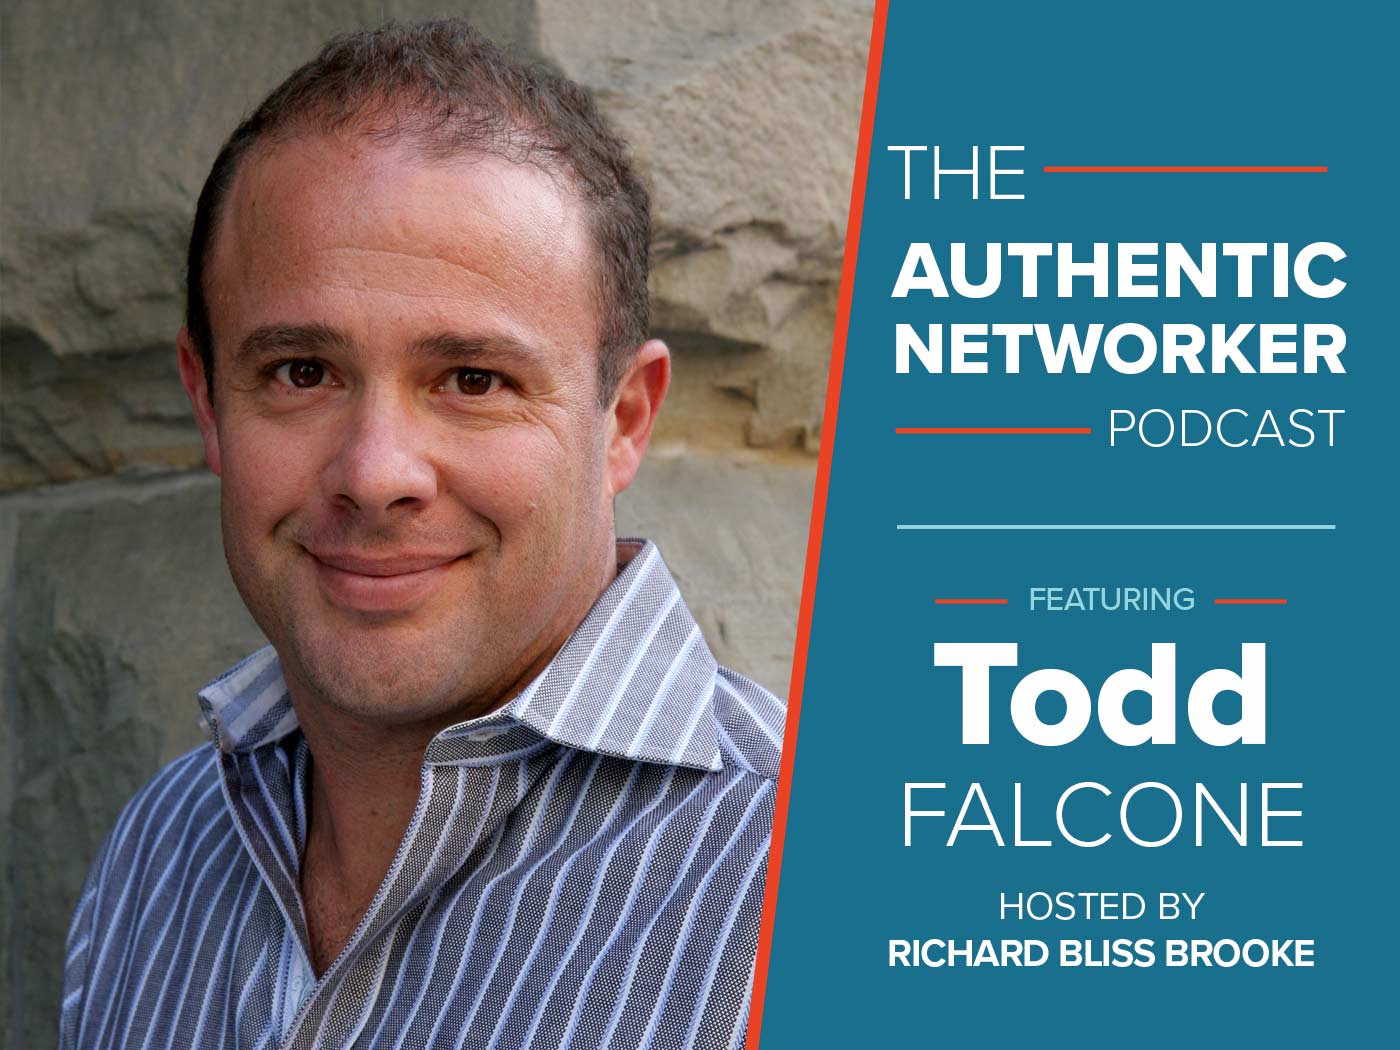 Todd Falcone - Fearless Networking